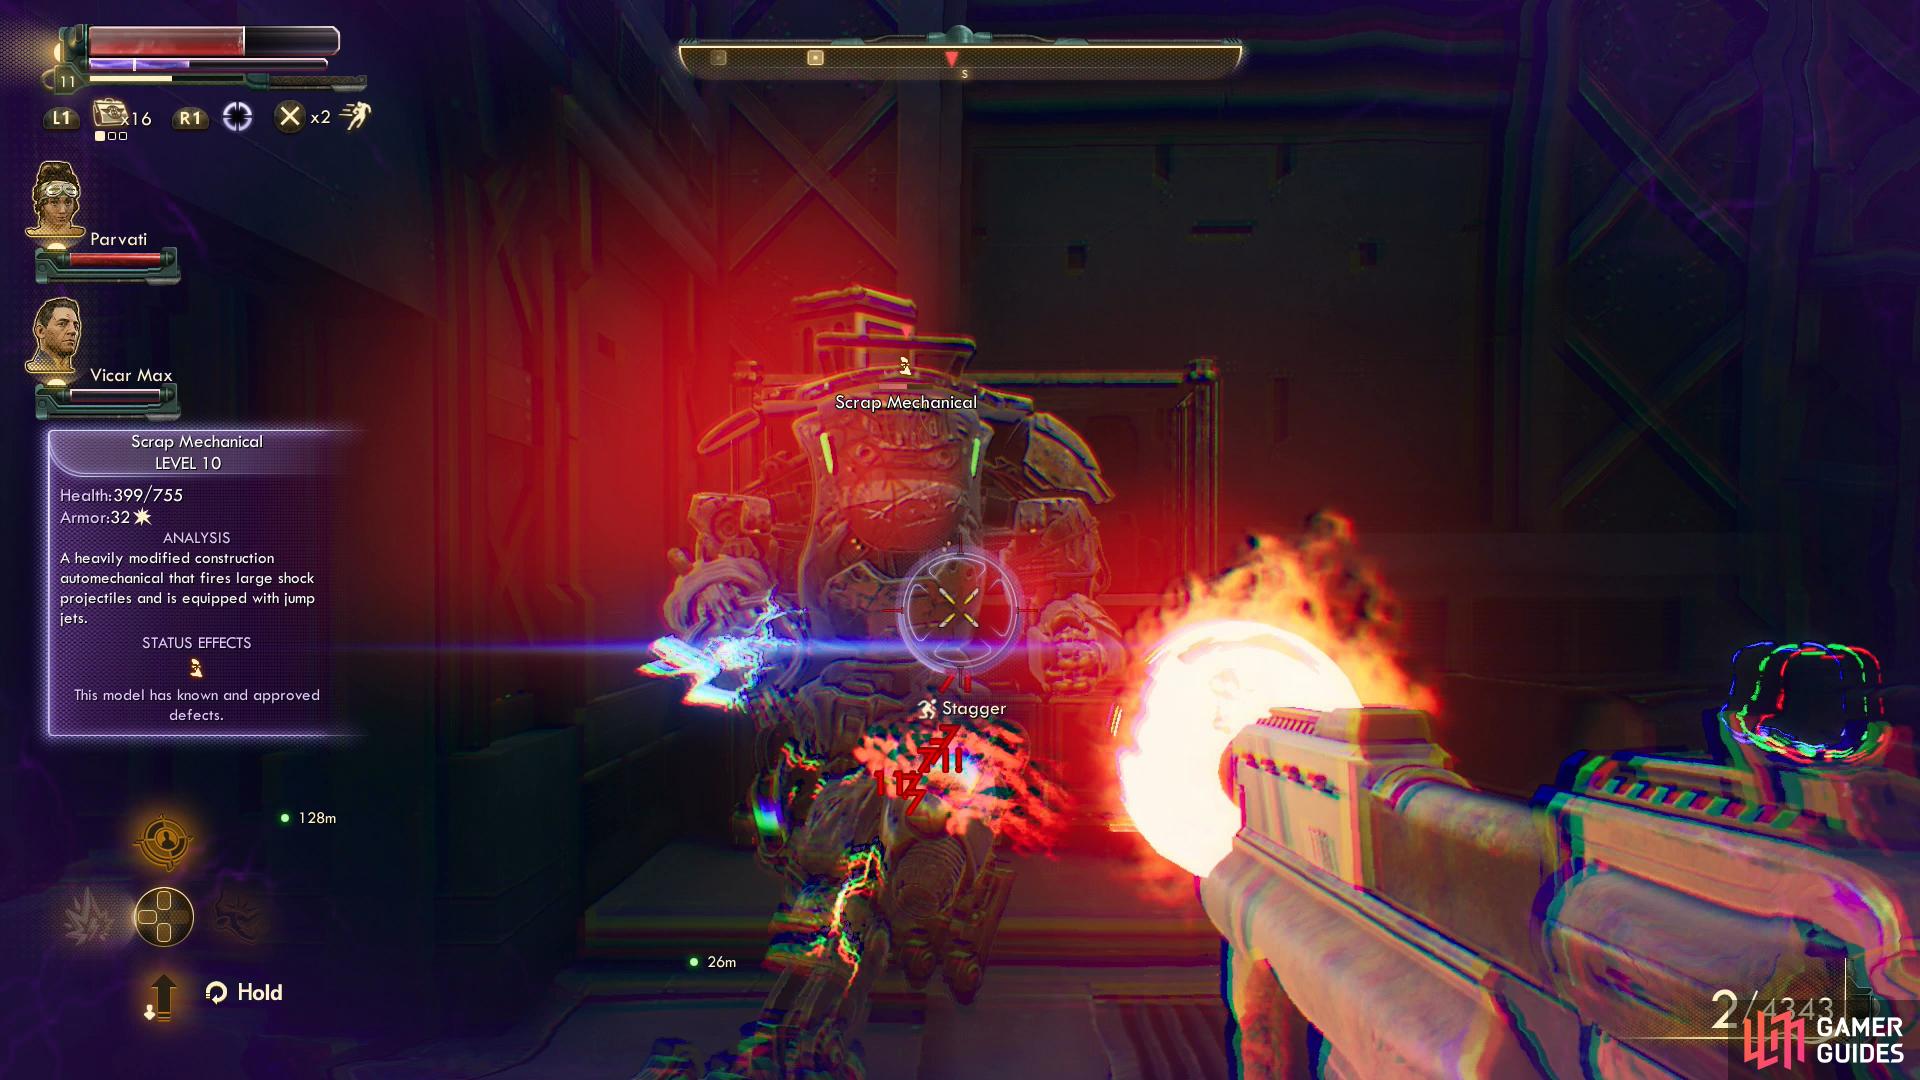 In the hidden hangar you'll need to kill some outlaws and their pet mech.